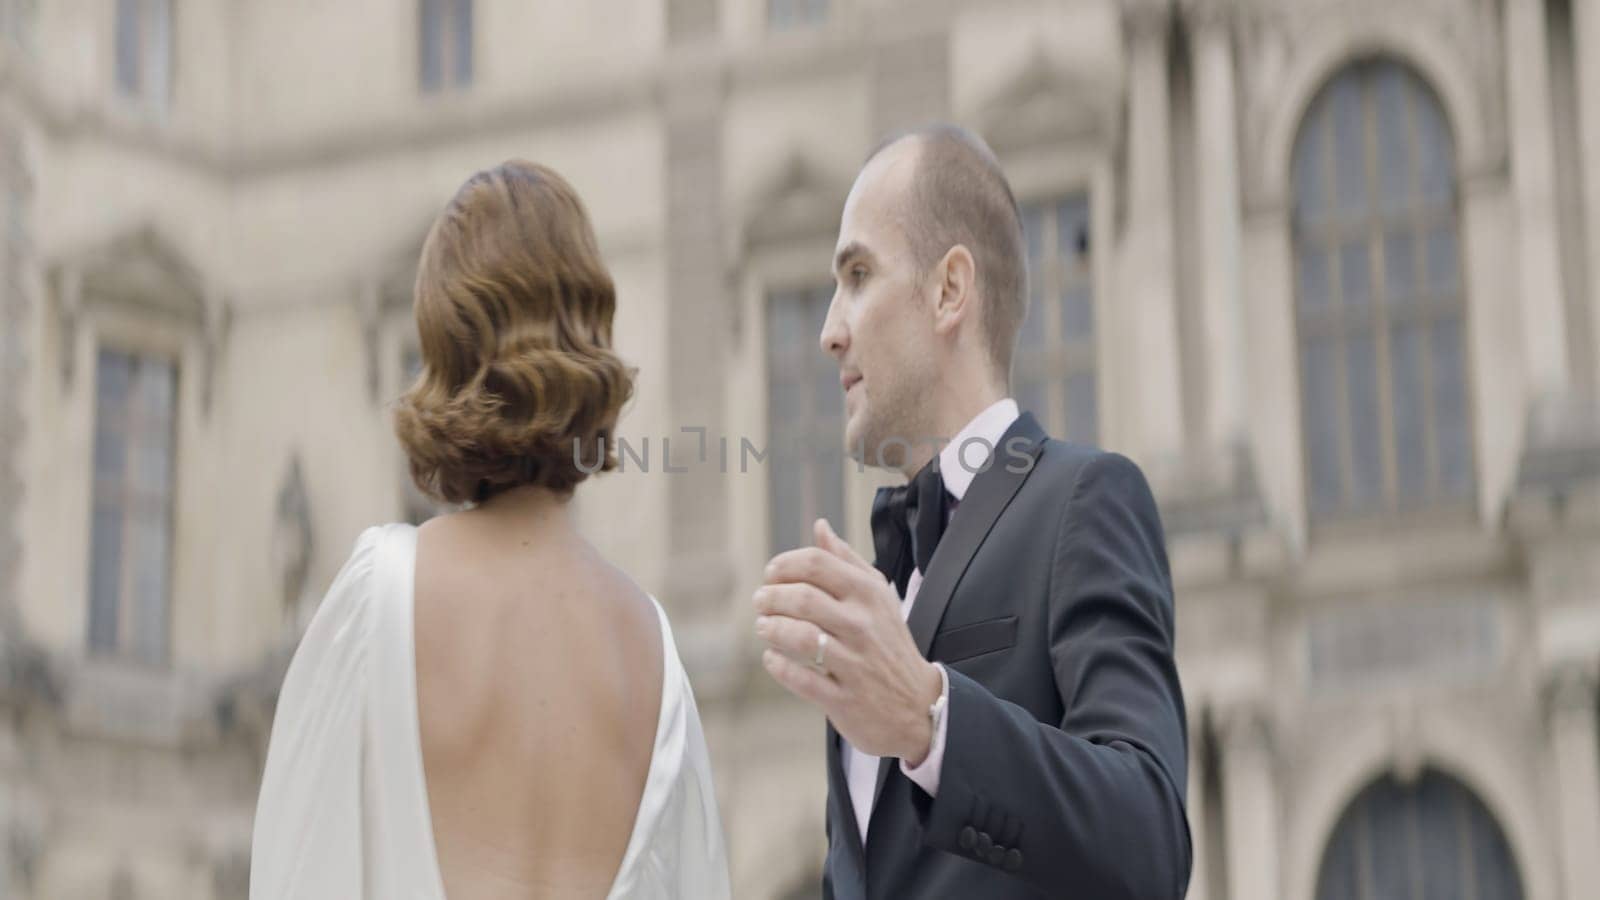 Dancing joyful couple. Action. A beautiful brunette in a white dress and her fiance are laughing and having fun in the square of a built-up city. High quality 4k footage